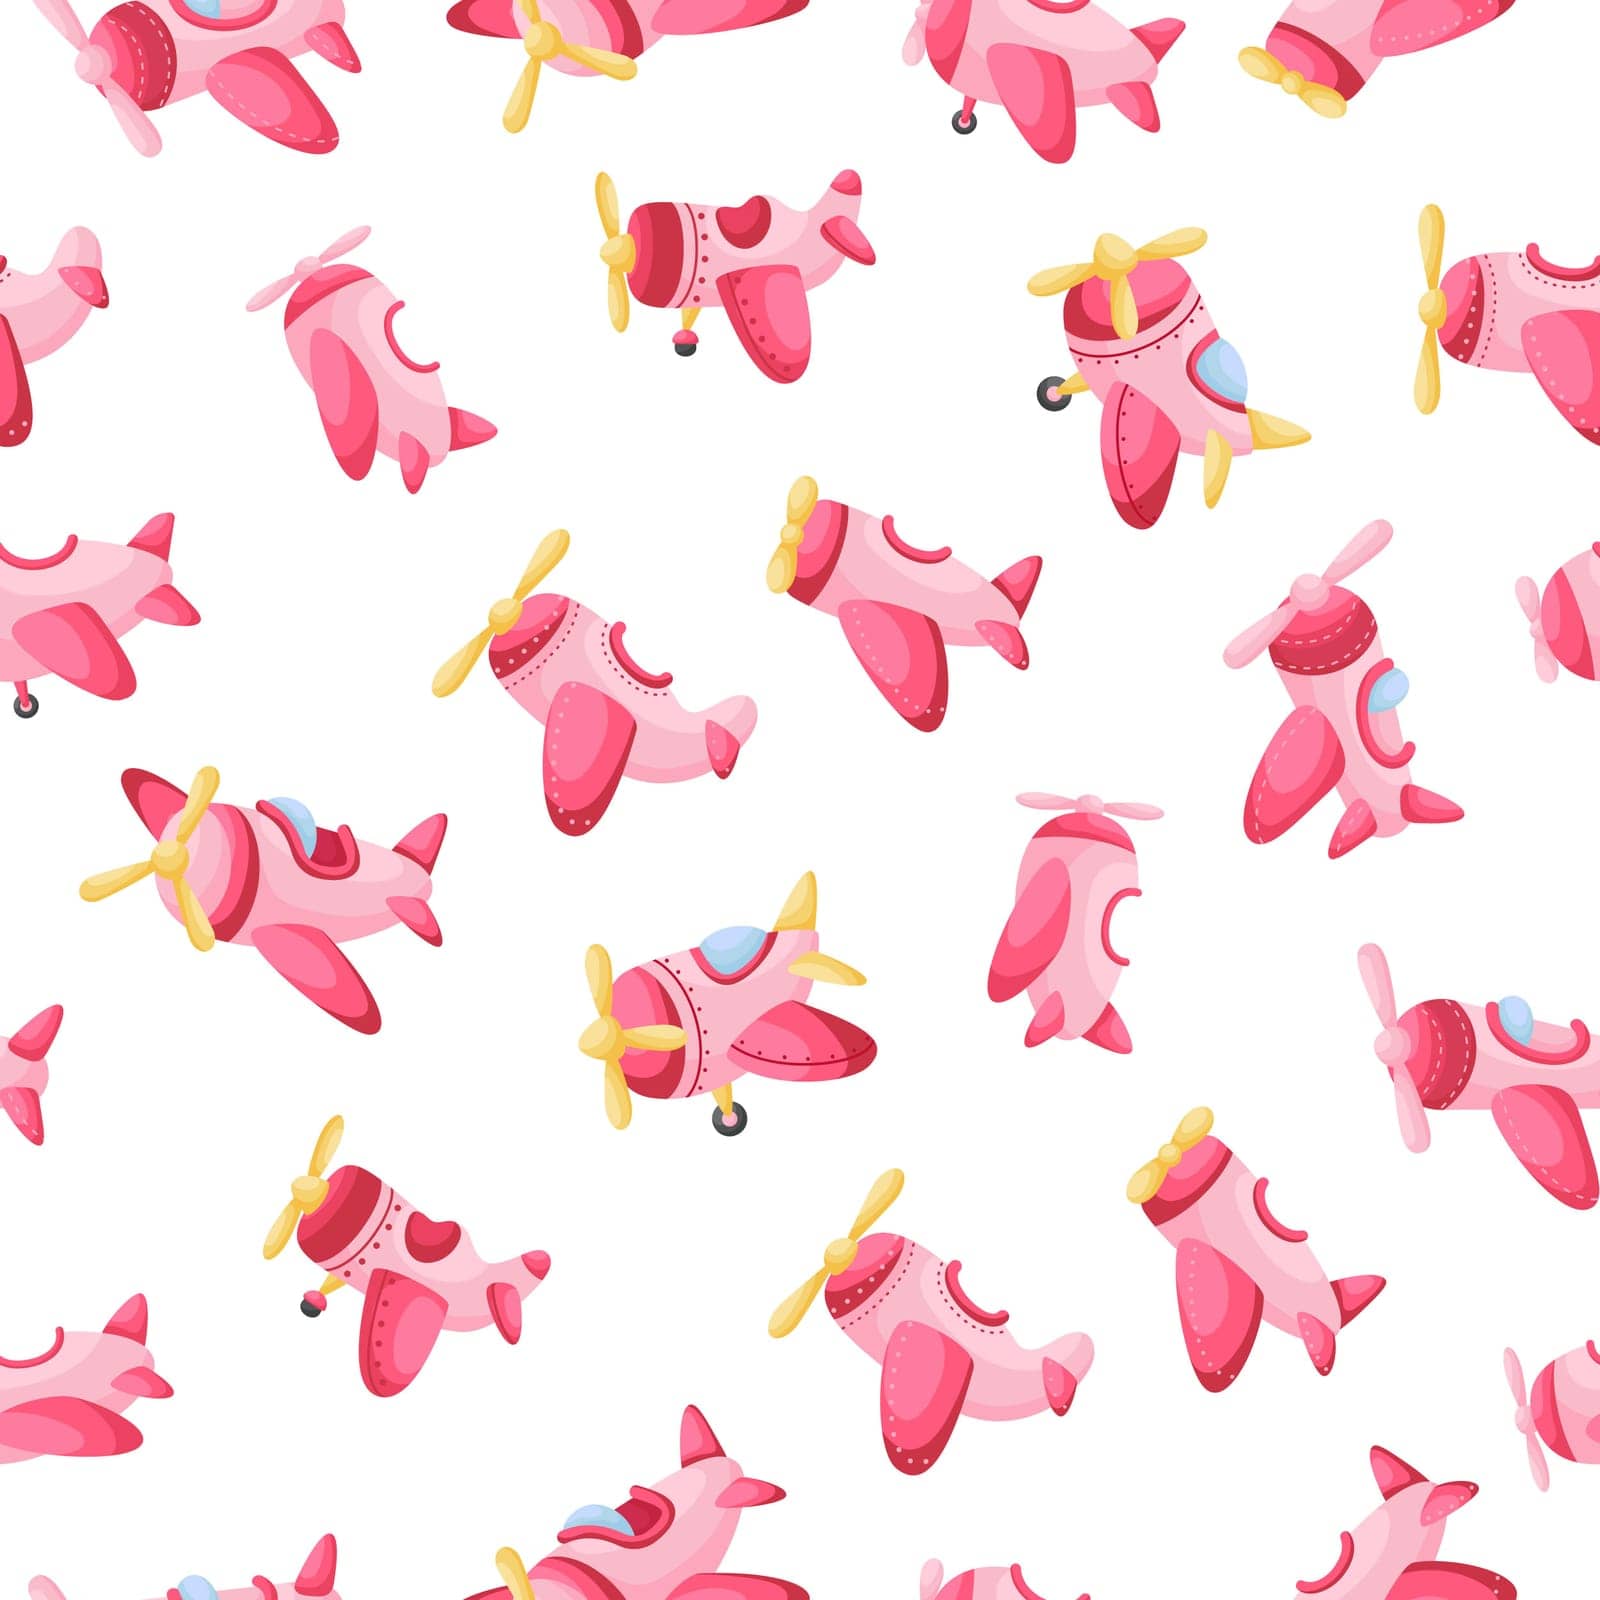 Cute children's seamless pattern with pink planes. Creative kids texture for fabric, wrapping, textile, wallpaper, apparel. Vector illustration.